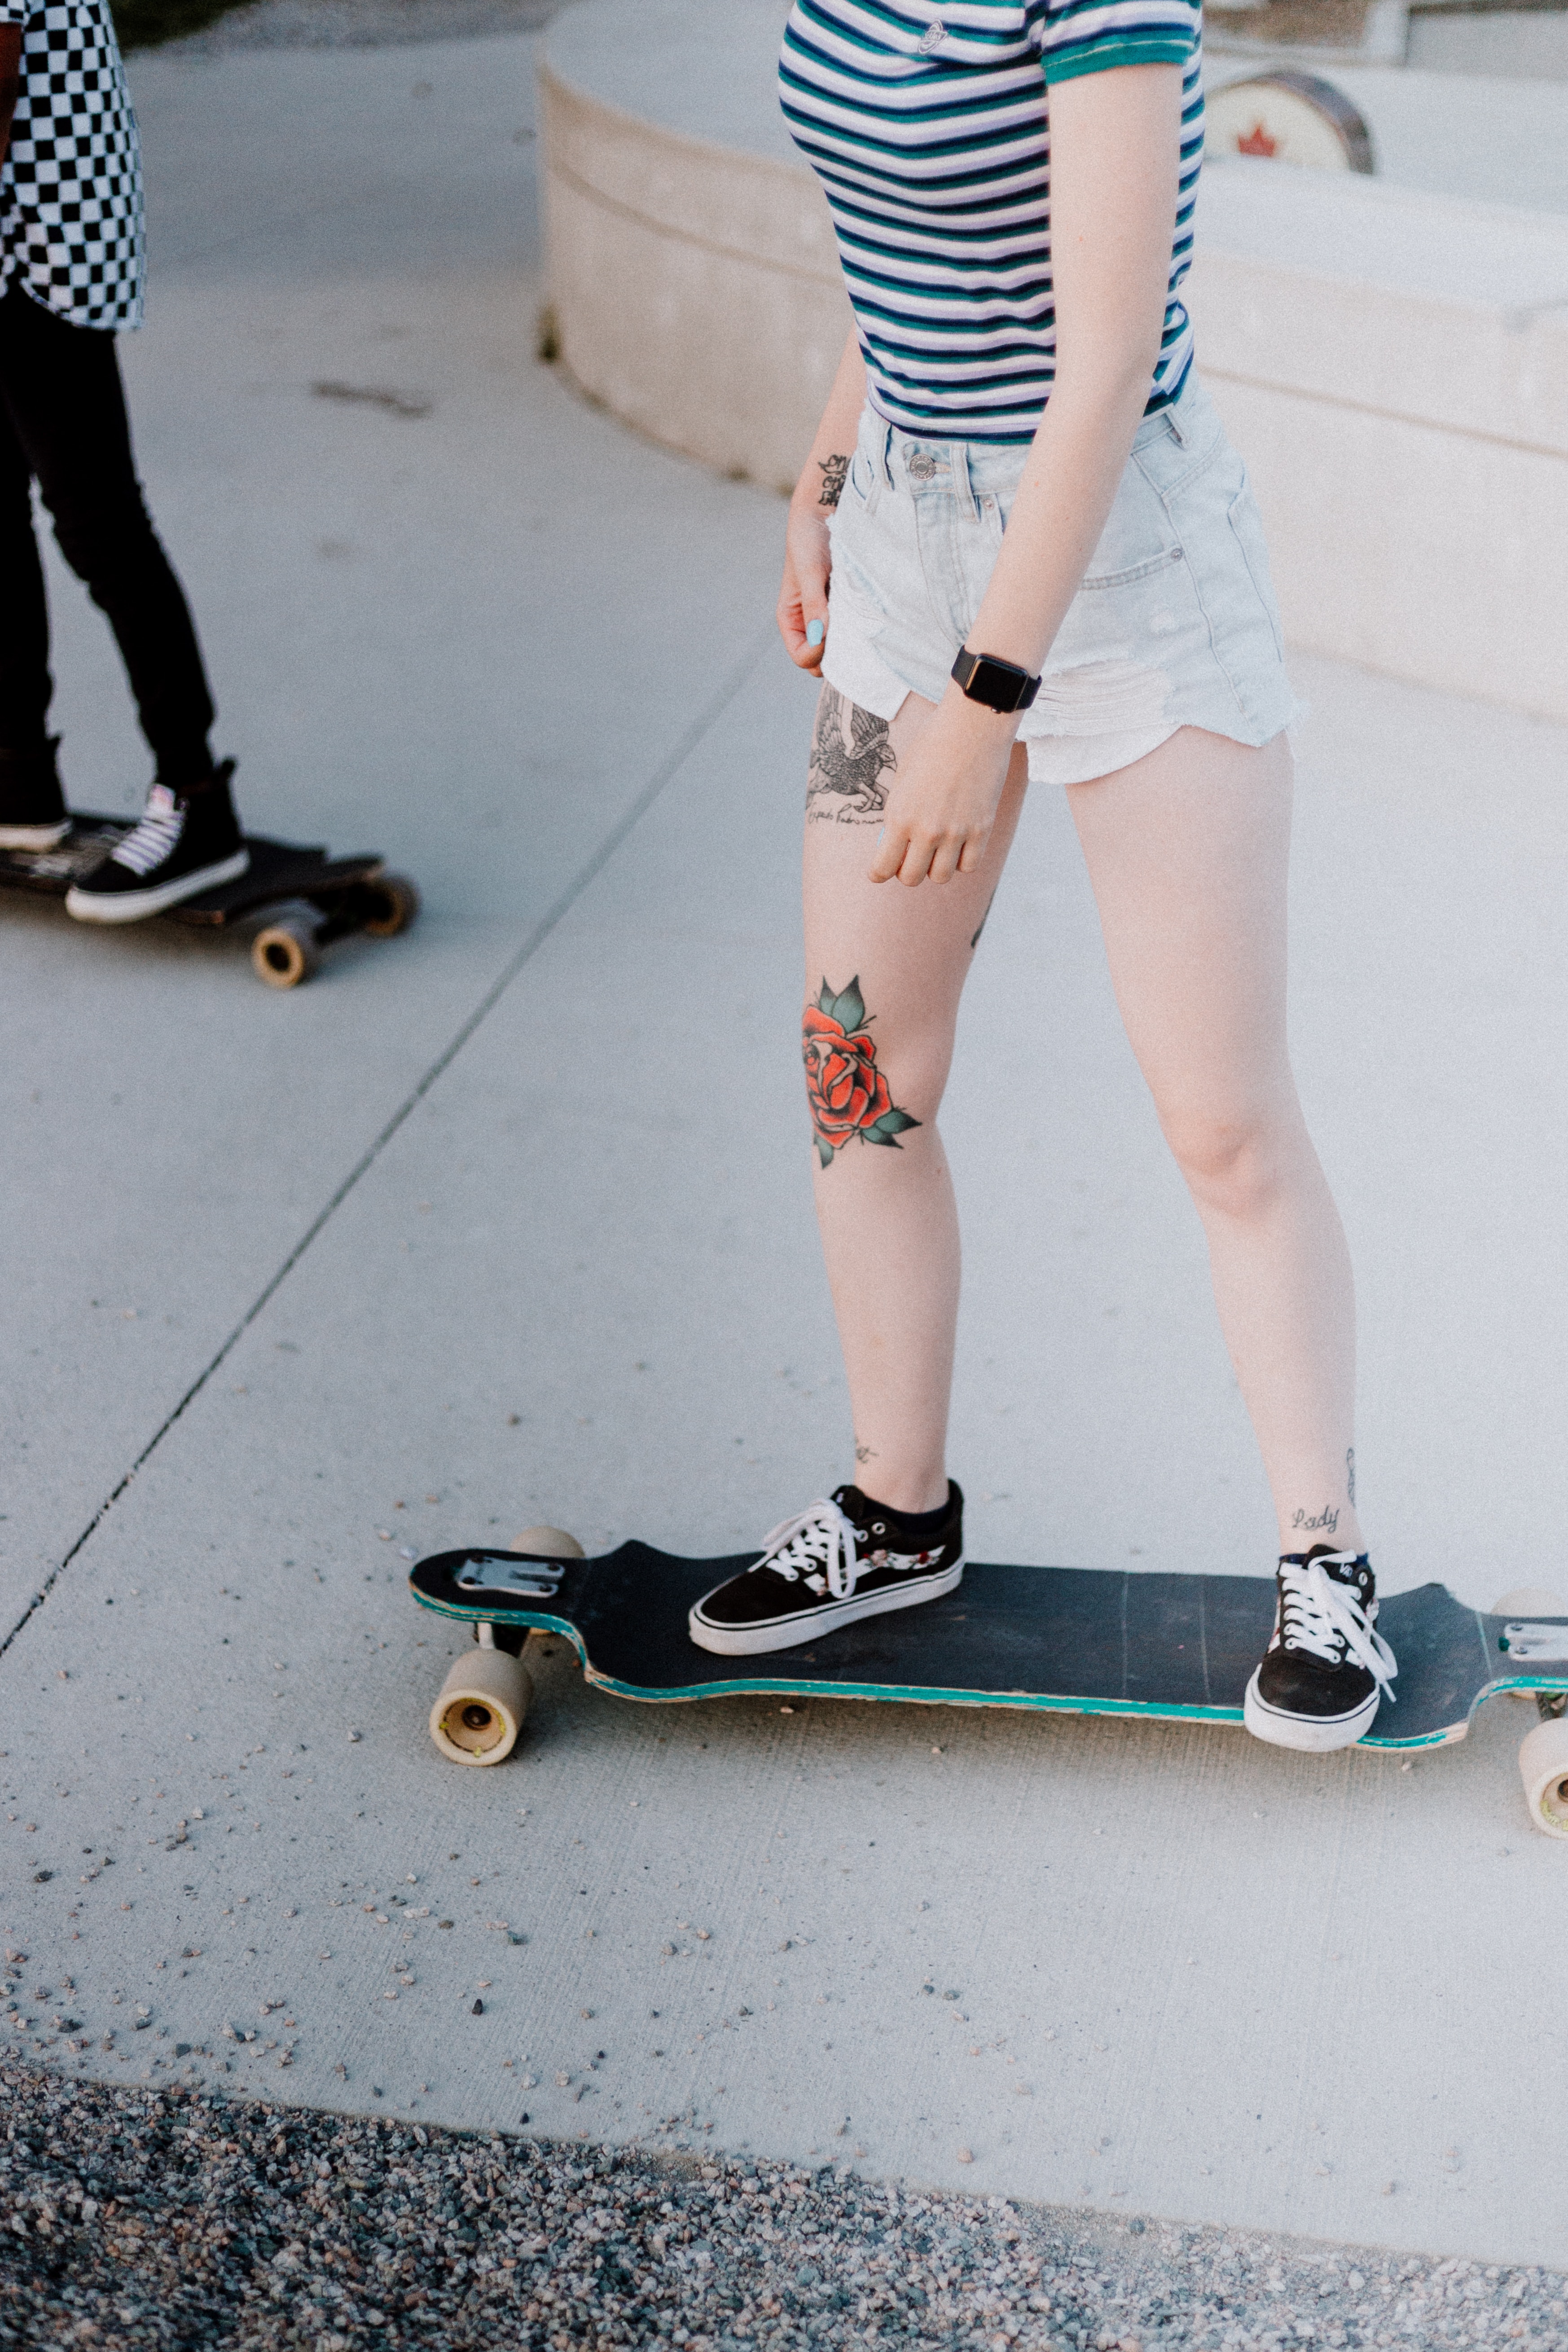 A photo of two people on skateboards | Source: Unsplash